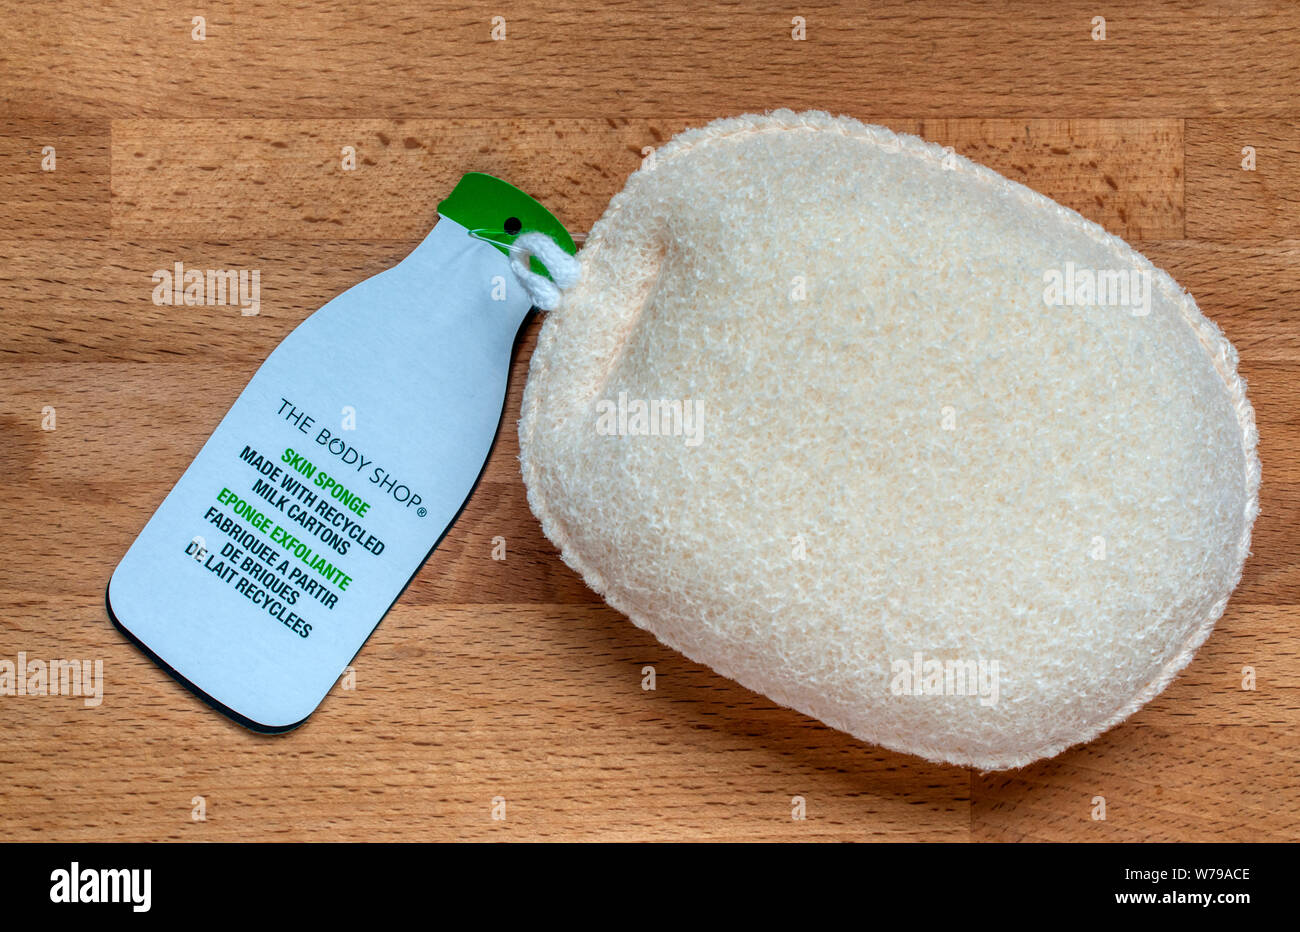 This Body Shop Skin Sponge is made from recycled milk cartons. Stock Photo